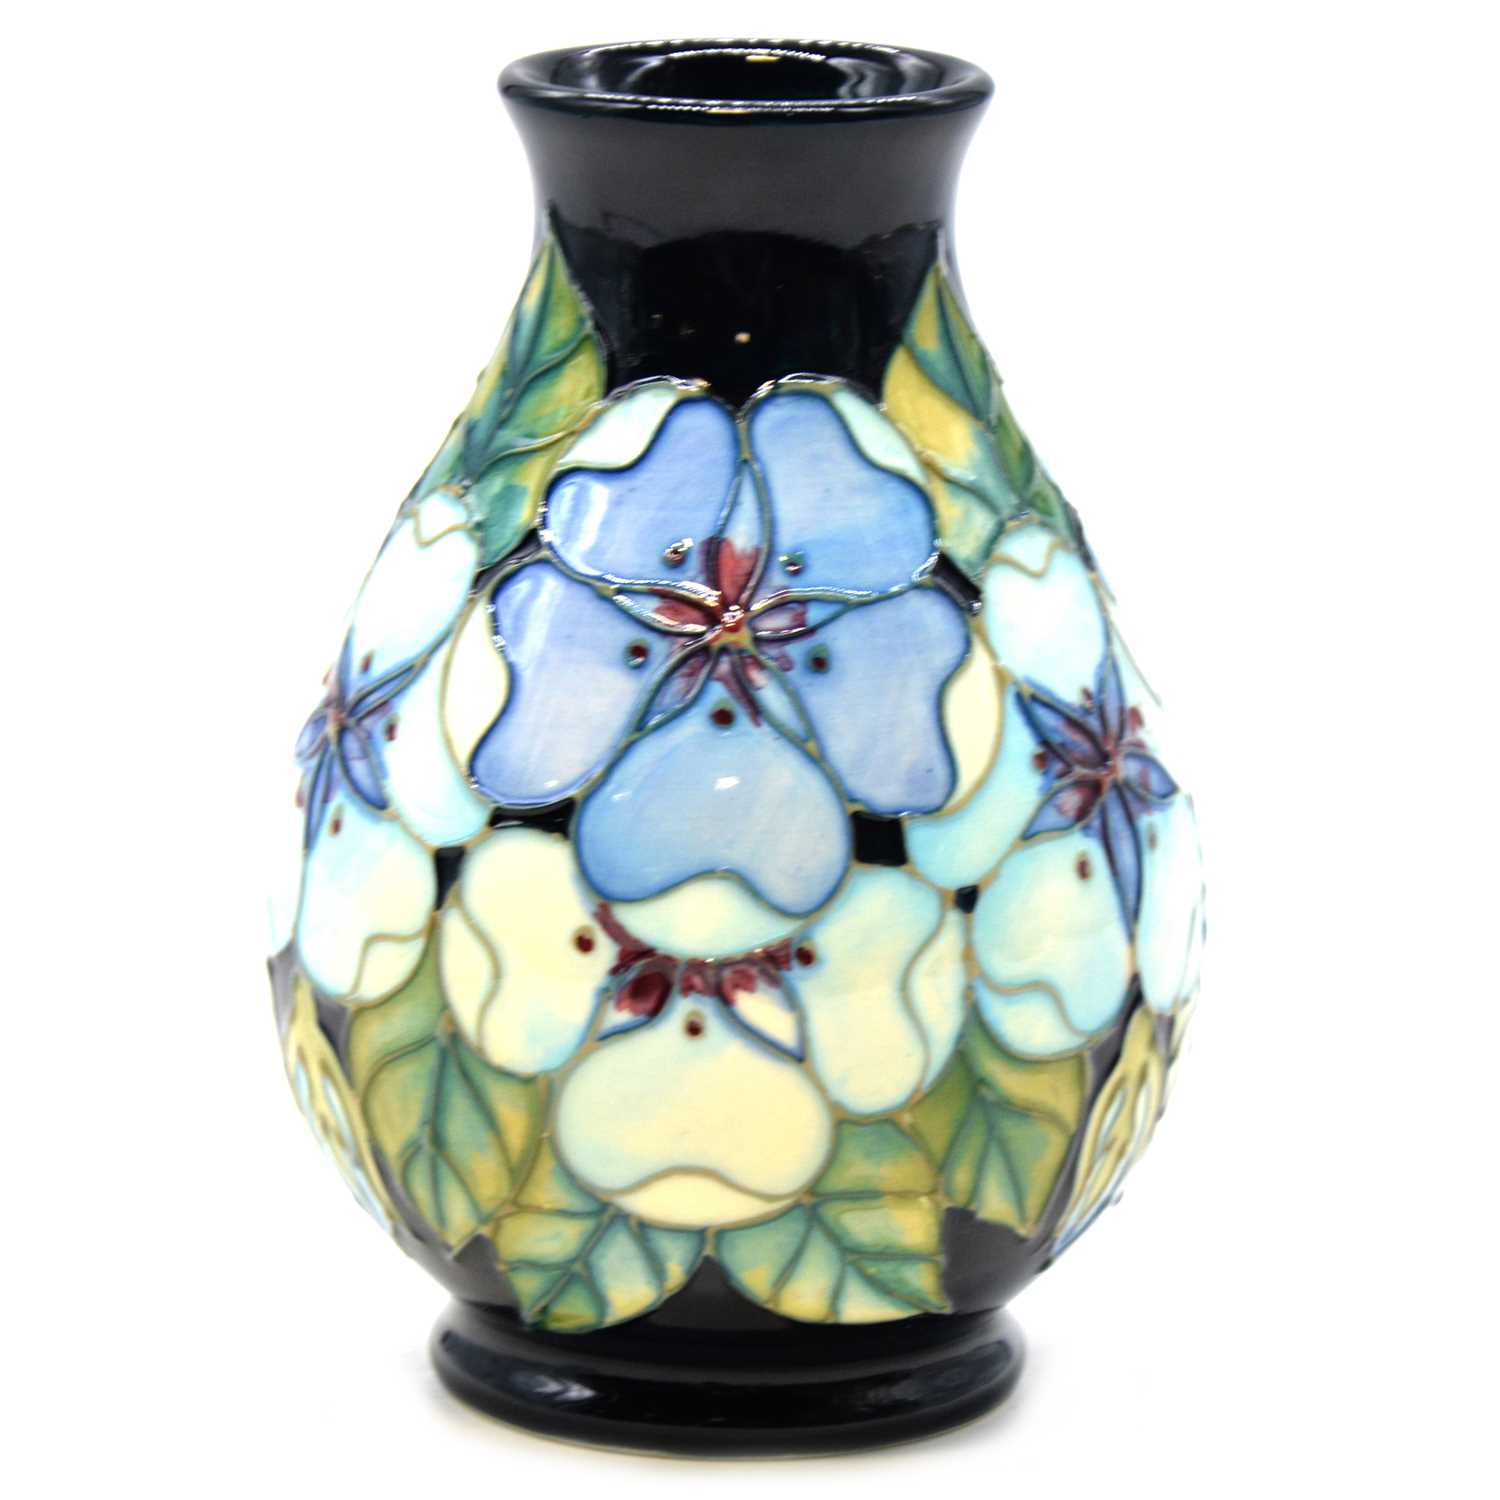 Lot 18 - Sally Tuffin for Moorcroft, a vase in the Tudor Rose design.